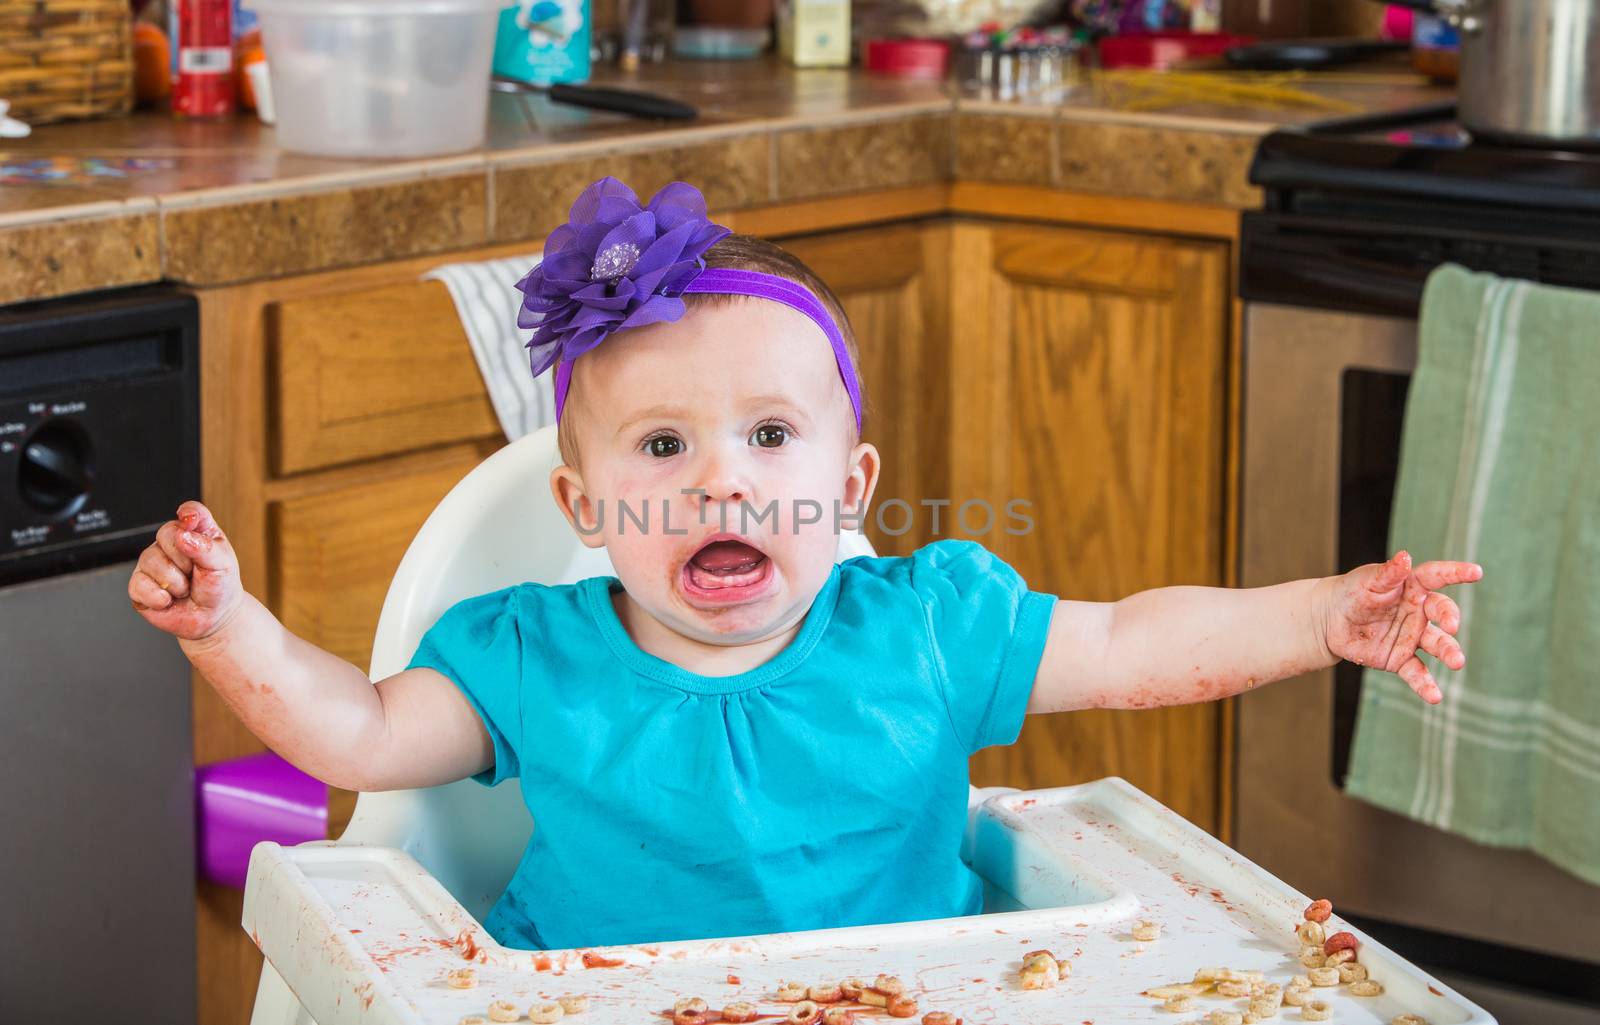 A talkative baby girl eating in the kitchen